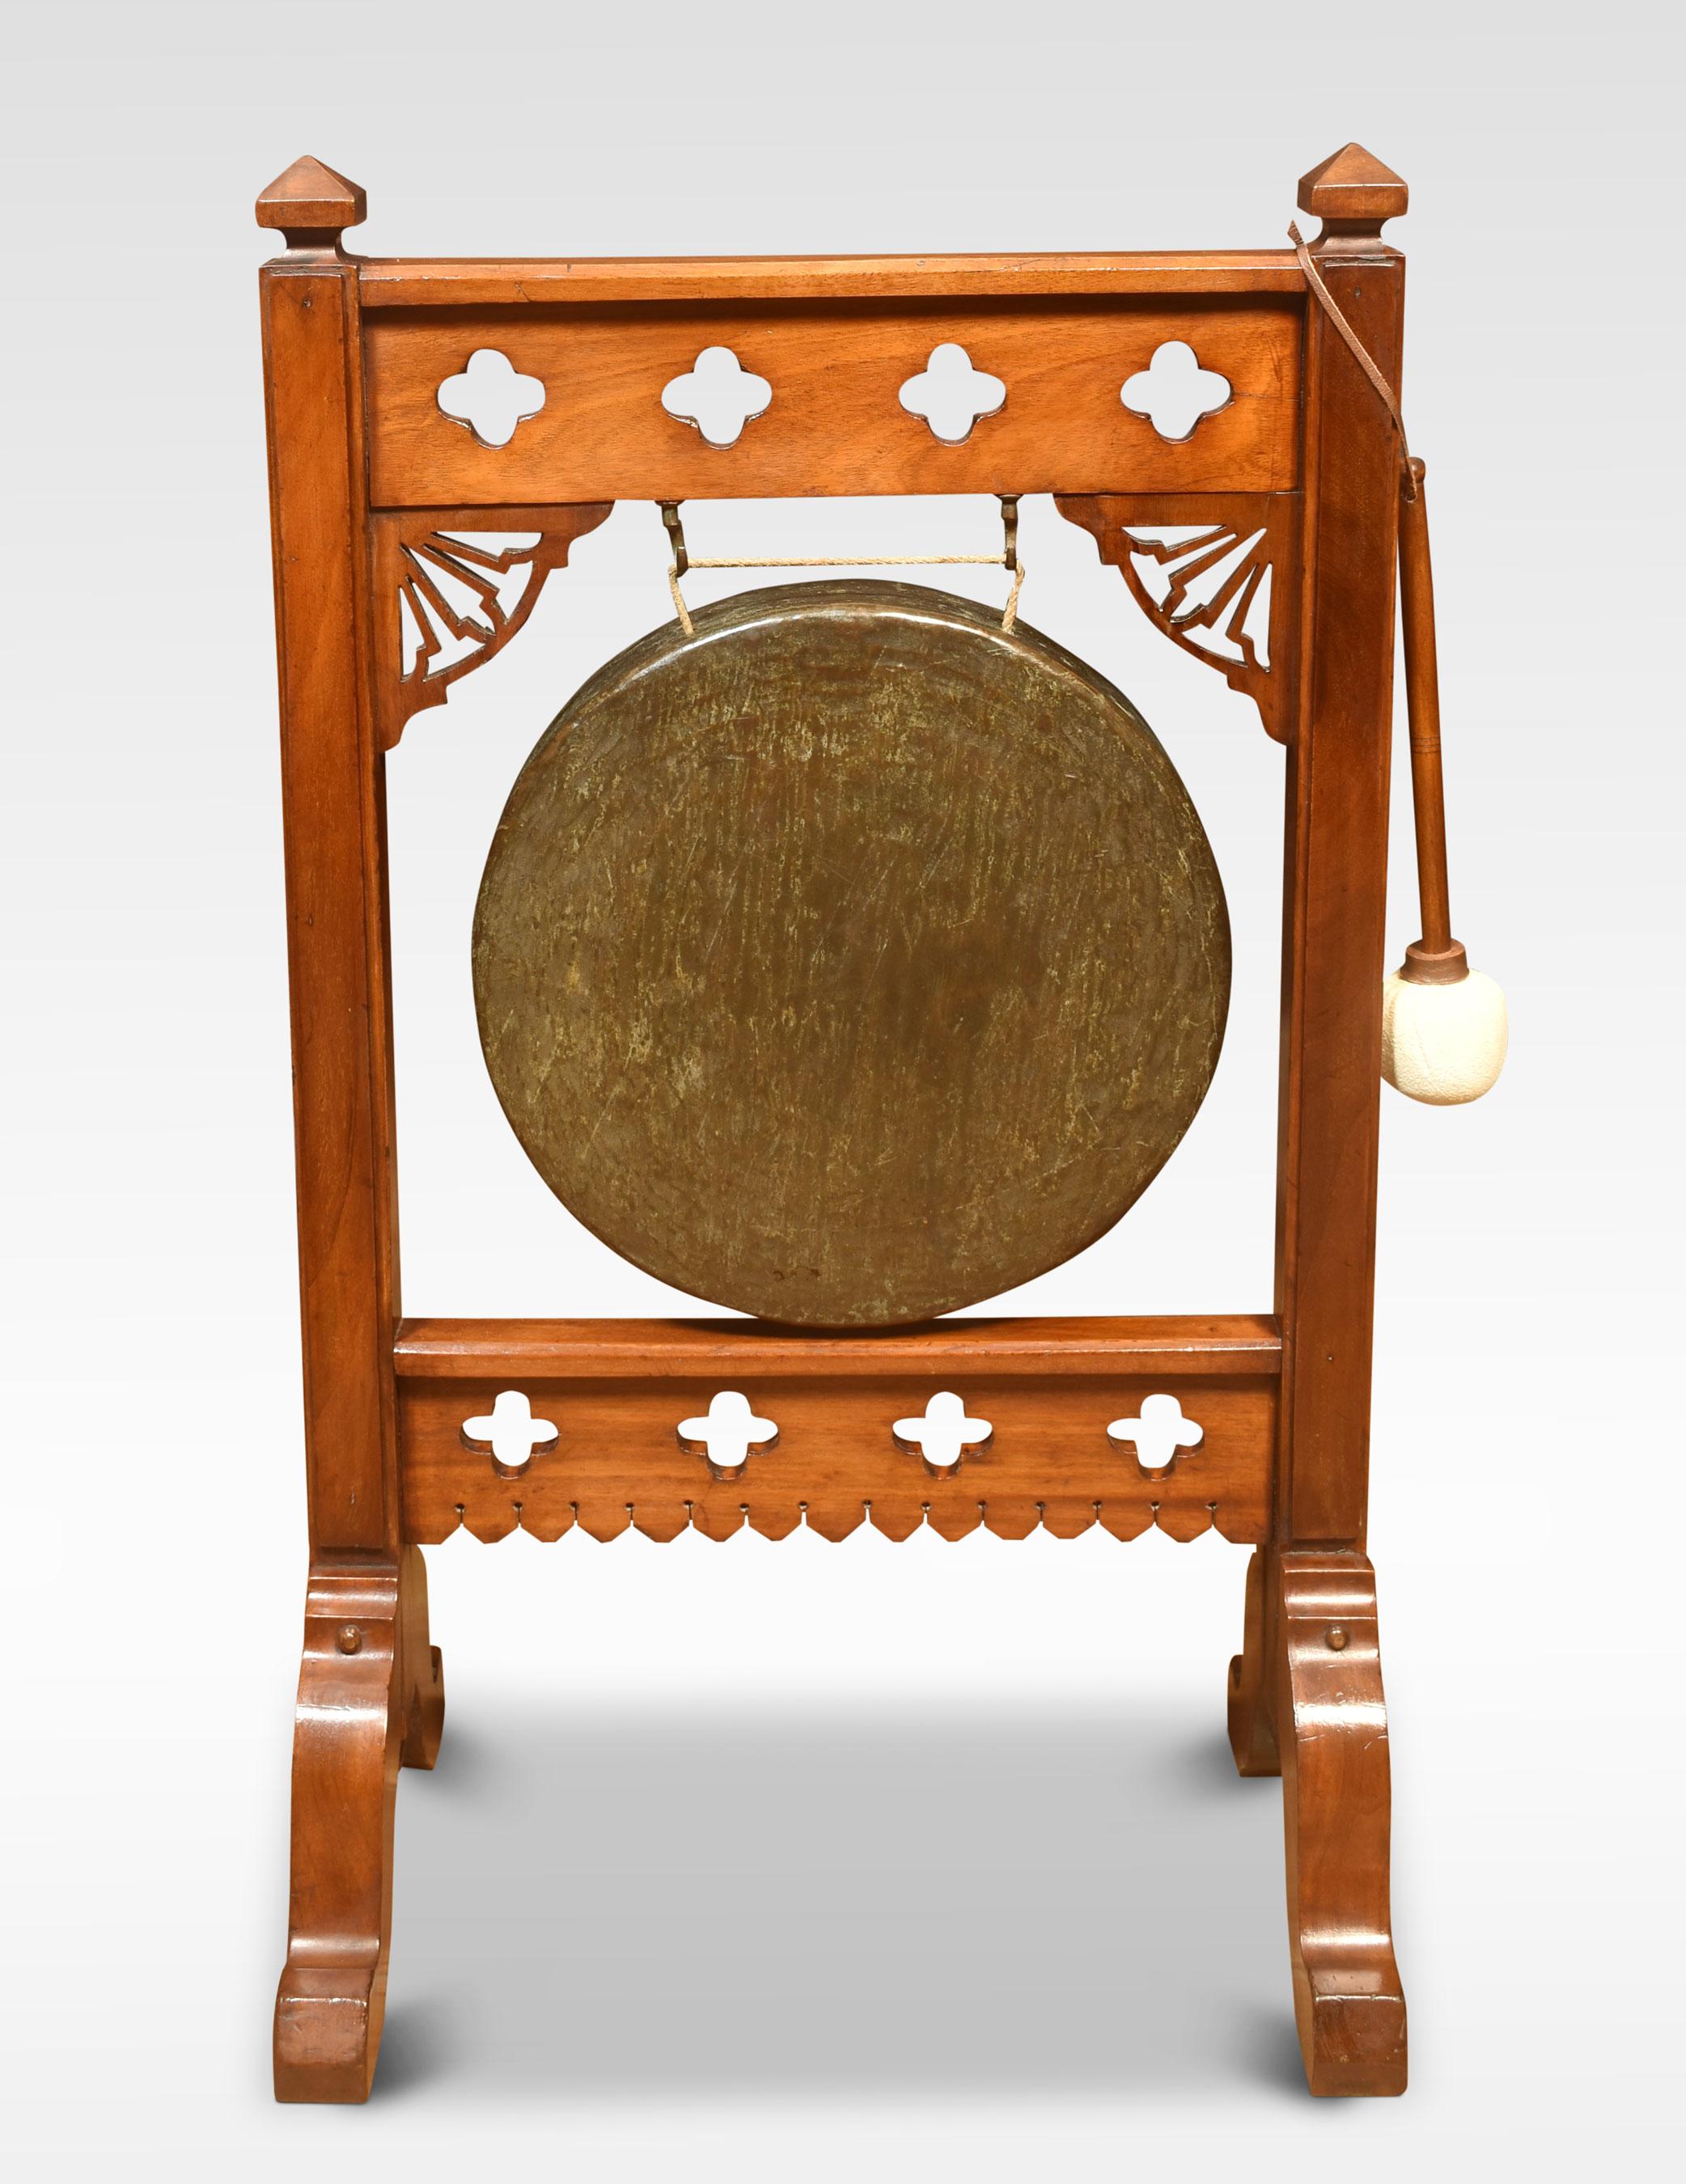 British Gothic Revival Dinner Gong For Sale